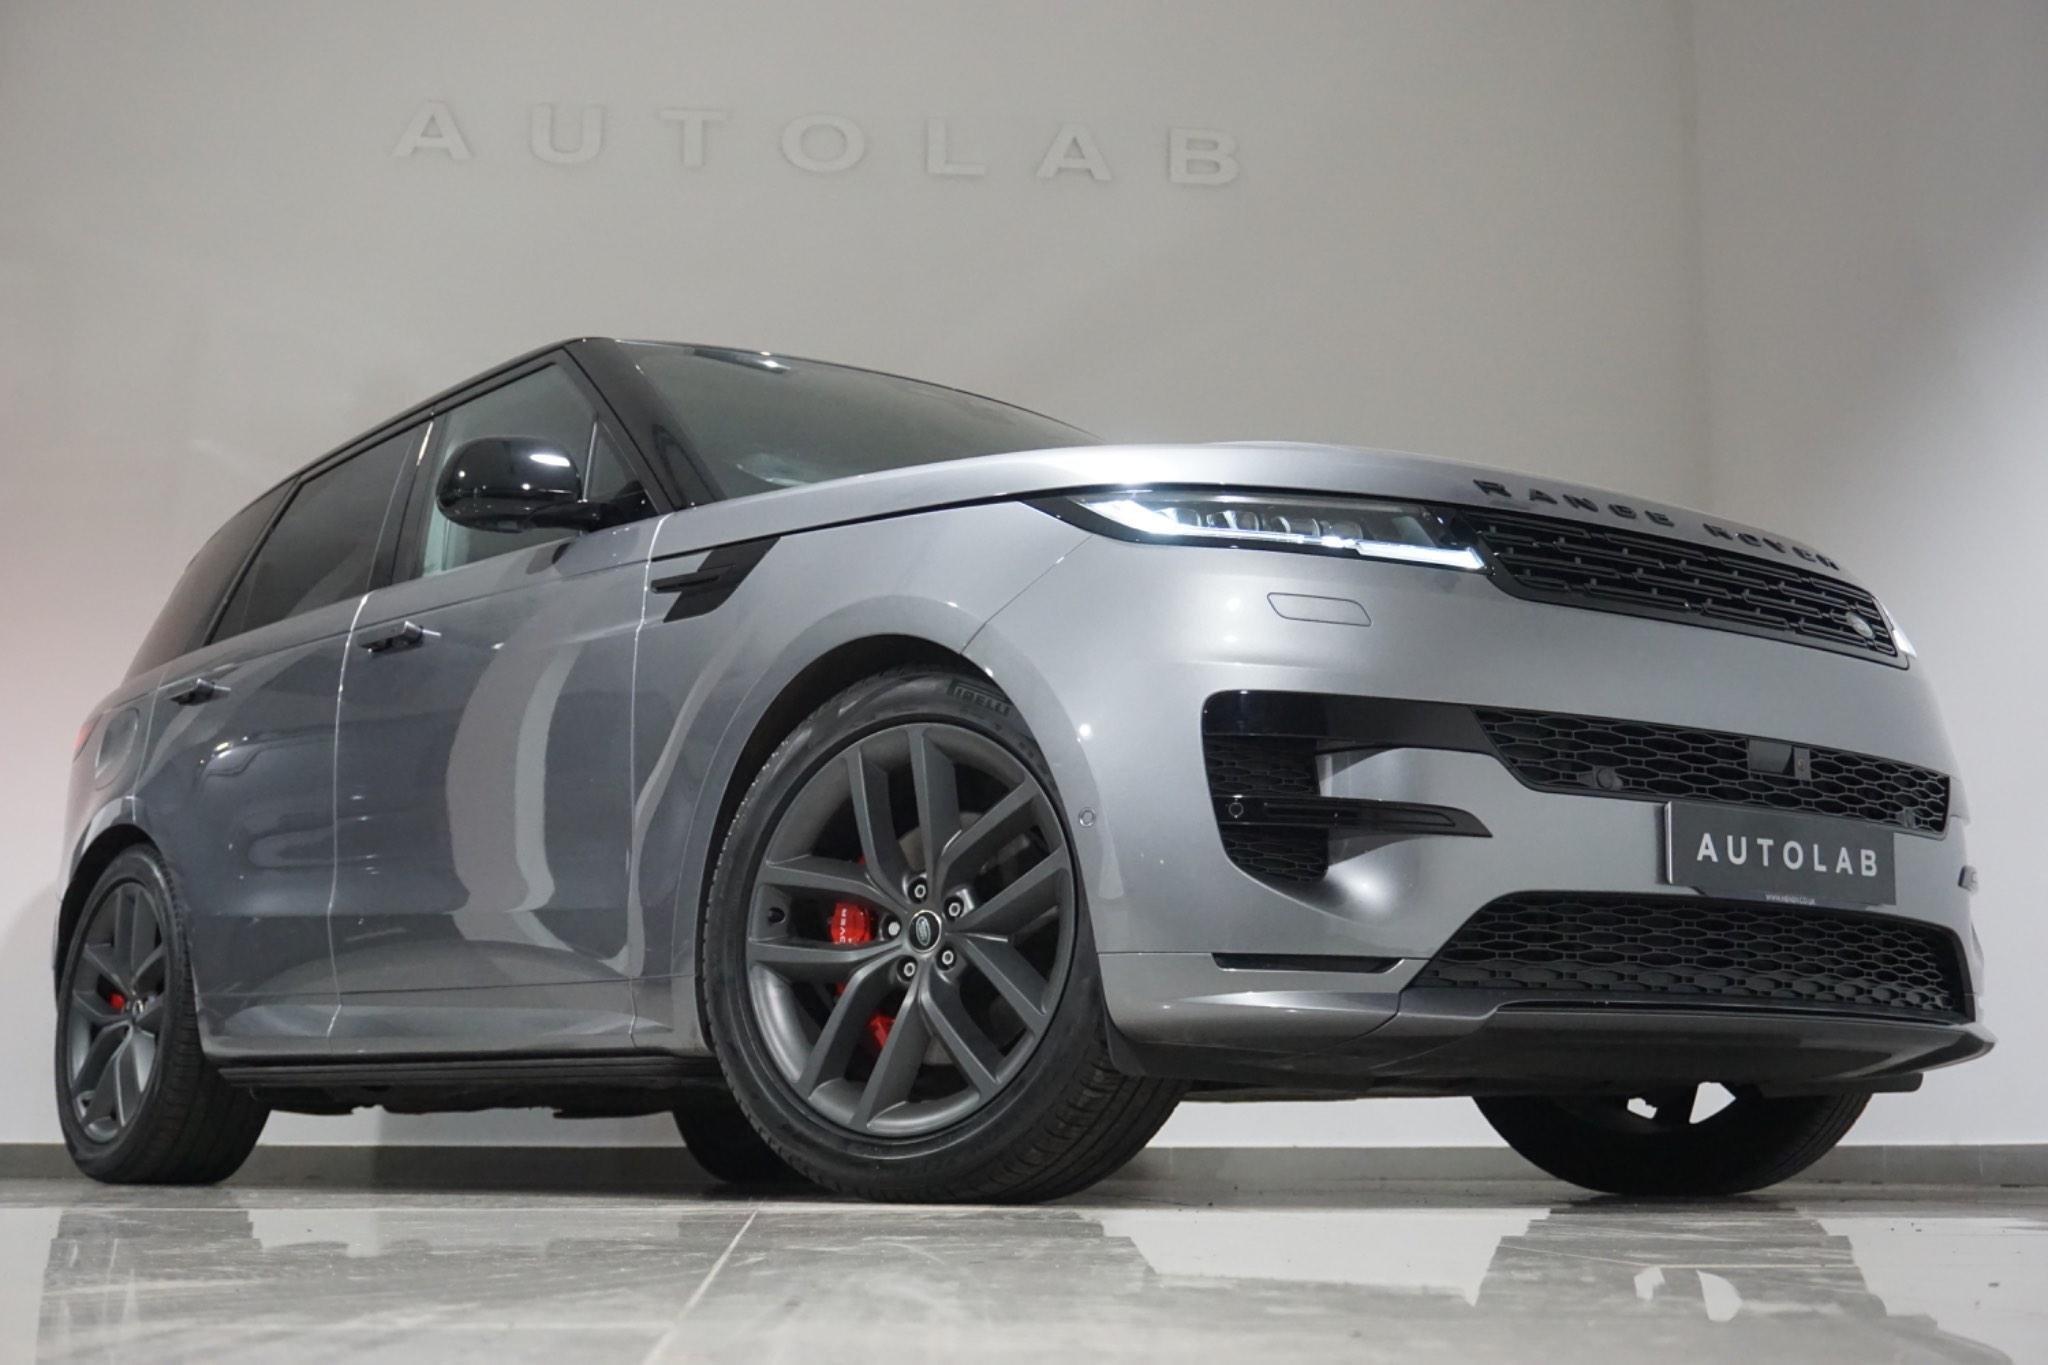 Land Rover Range Rover Sport 3.0 D300 MHEV Dynamic SE Auto 4WD Euro 6 (s/s) 5dr